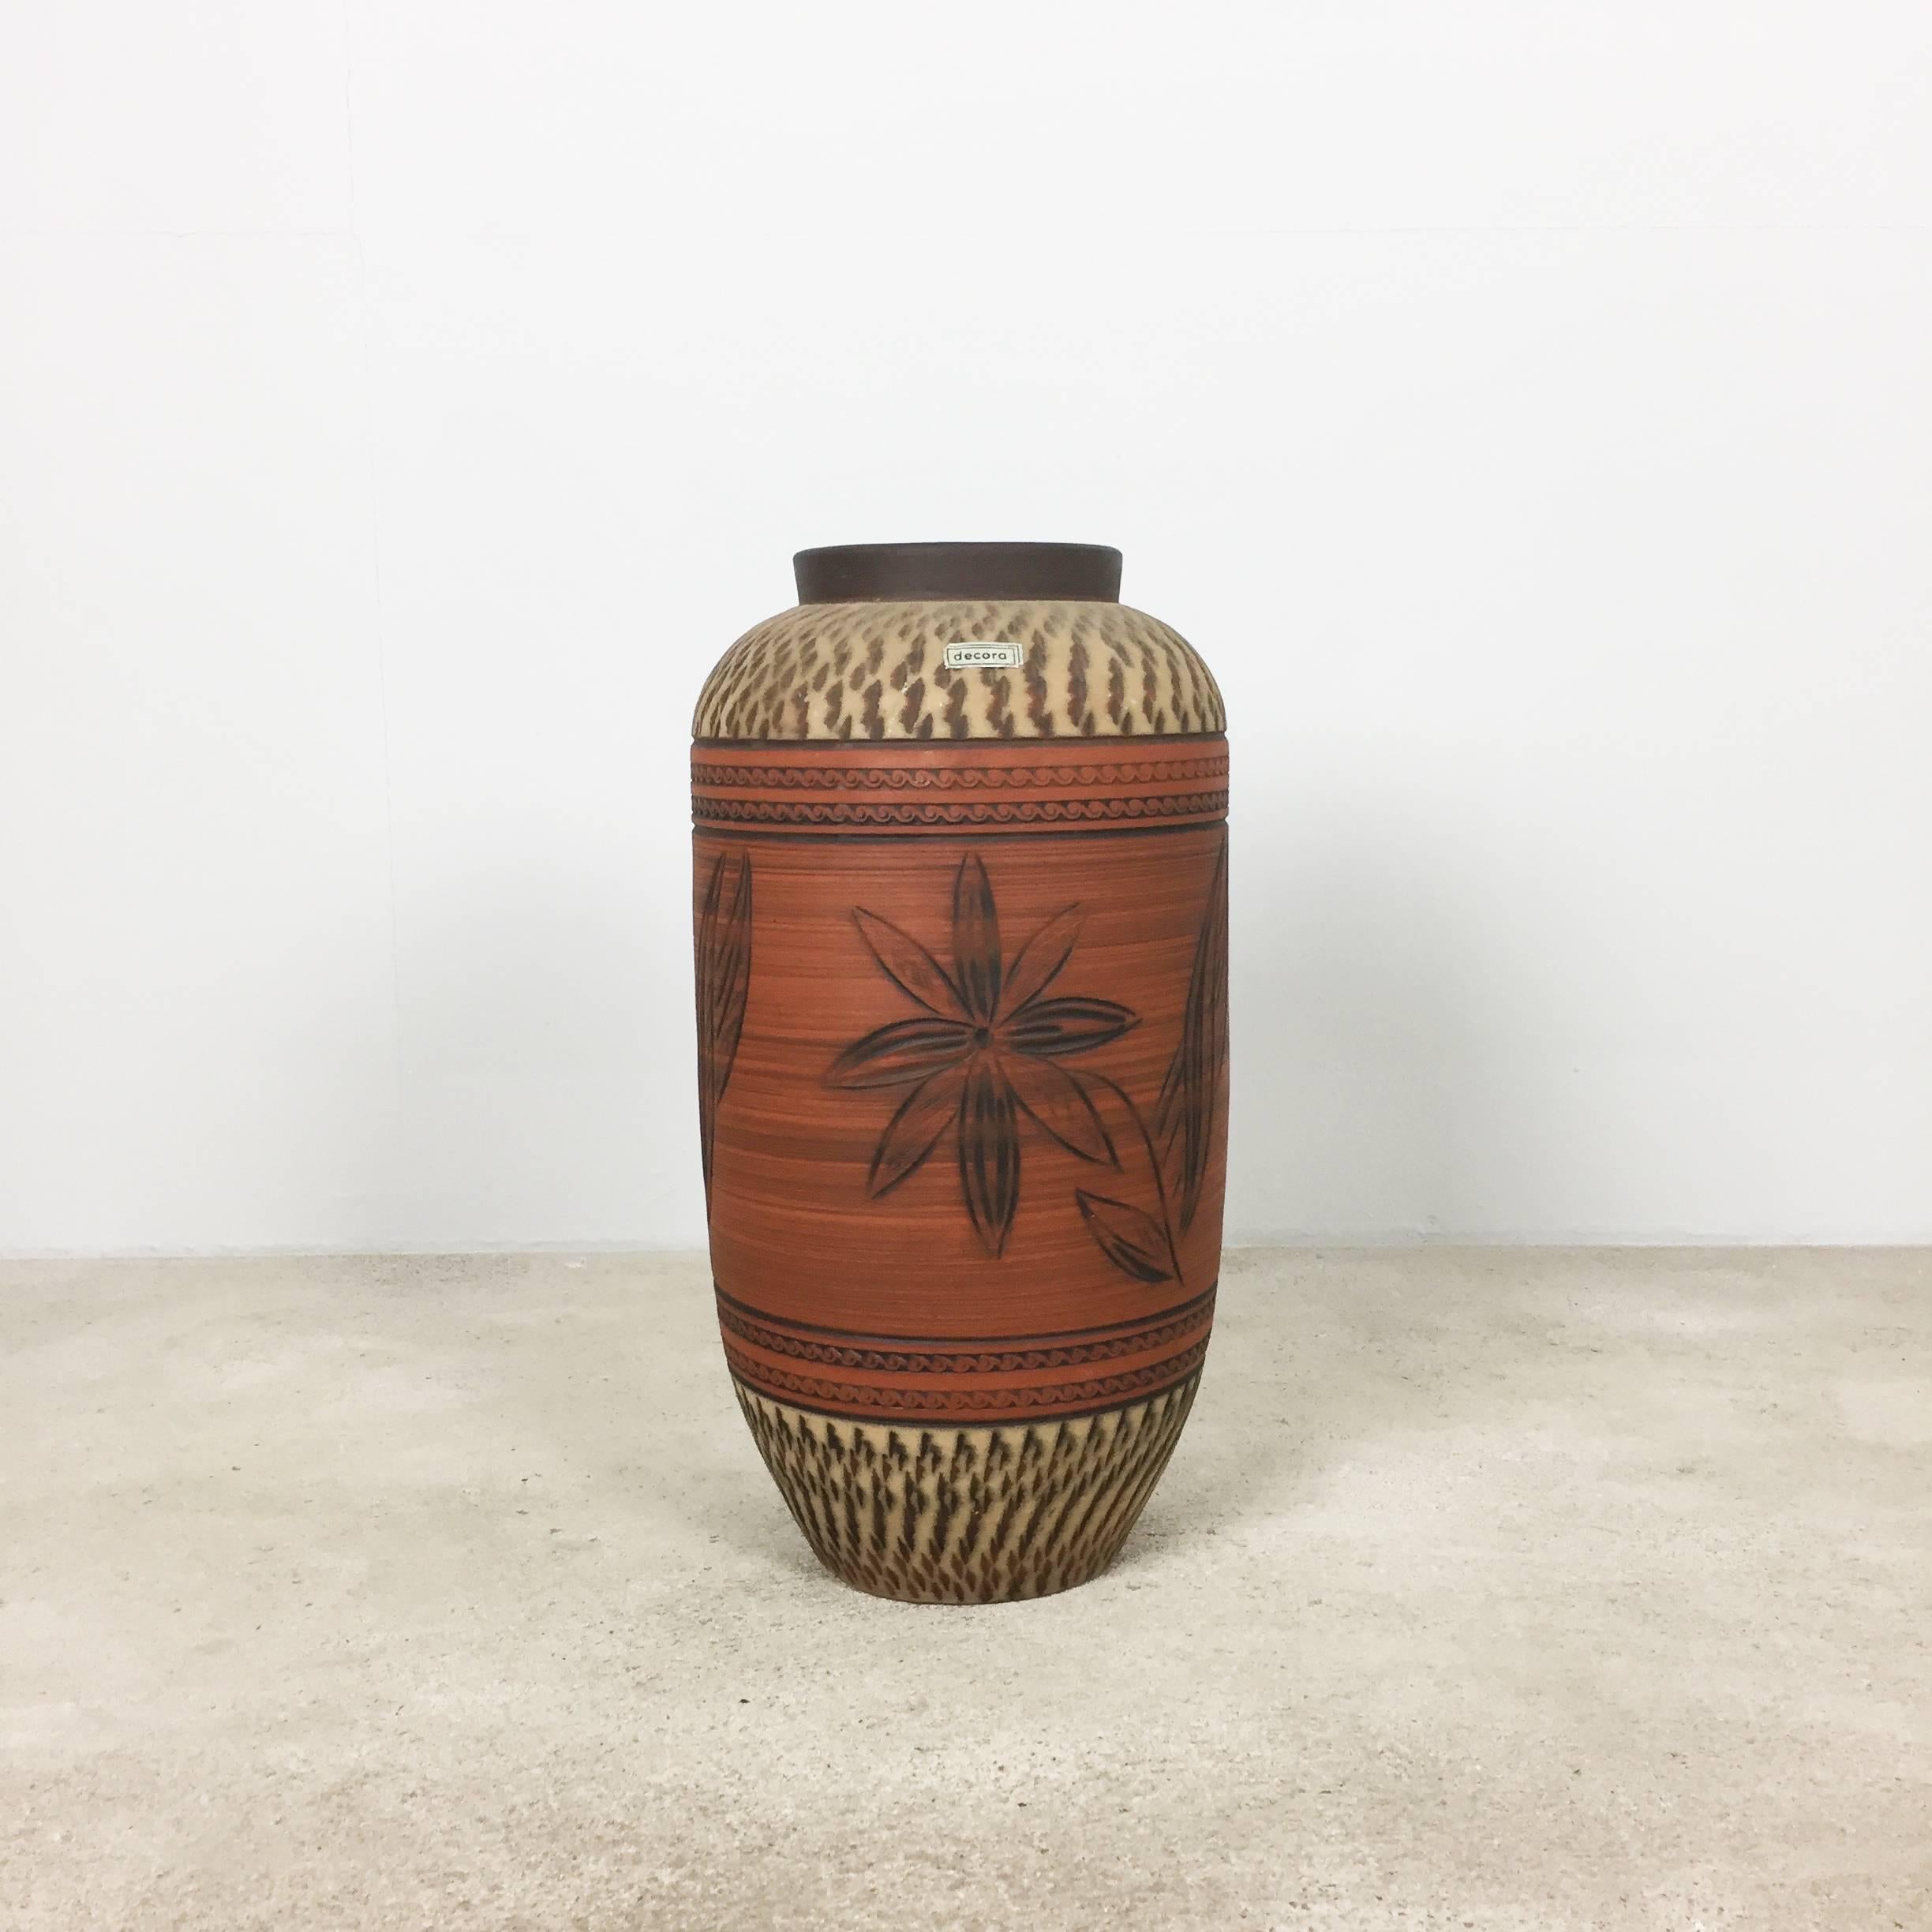 Article:

Pottery Ceramic Vase Floorvase


Producer:

DECORA Ceramic, Germany



Decade:

1960s



Description:

original vintage 1960s pottery ceramic vase made in Germany. High quality German production with a nice abstract painting. The vase was